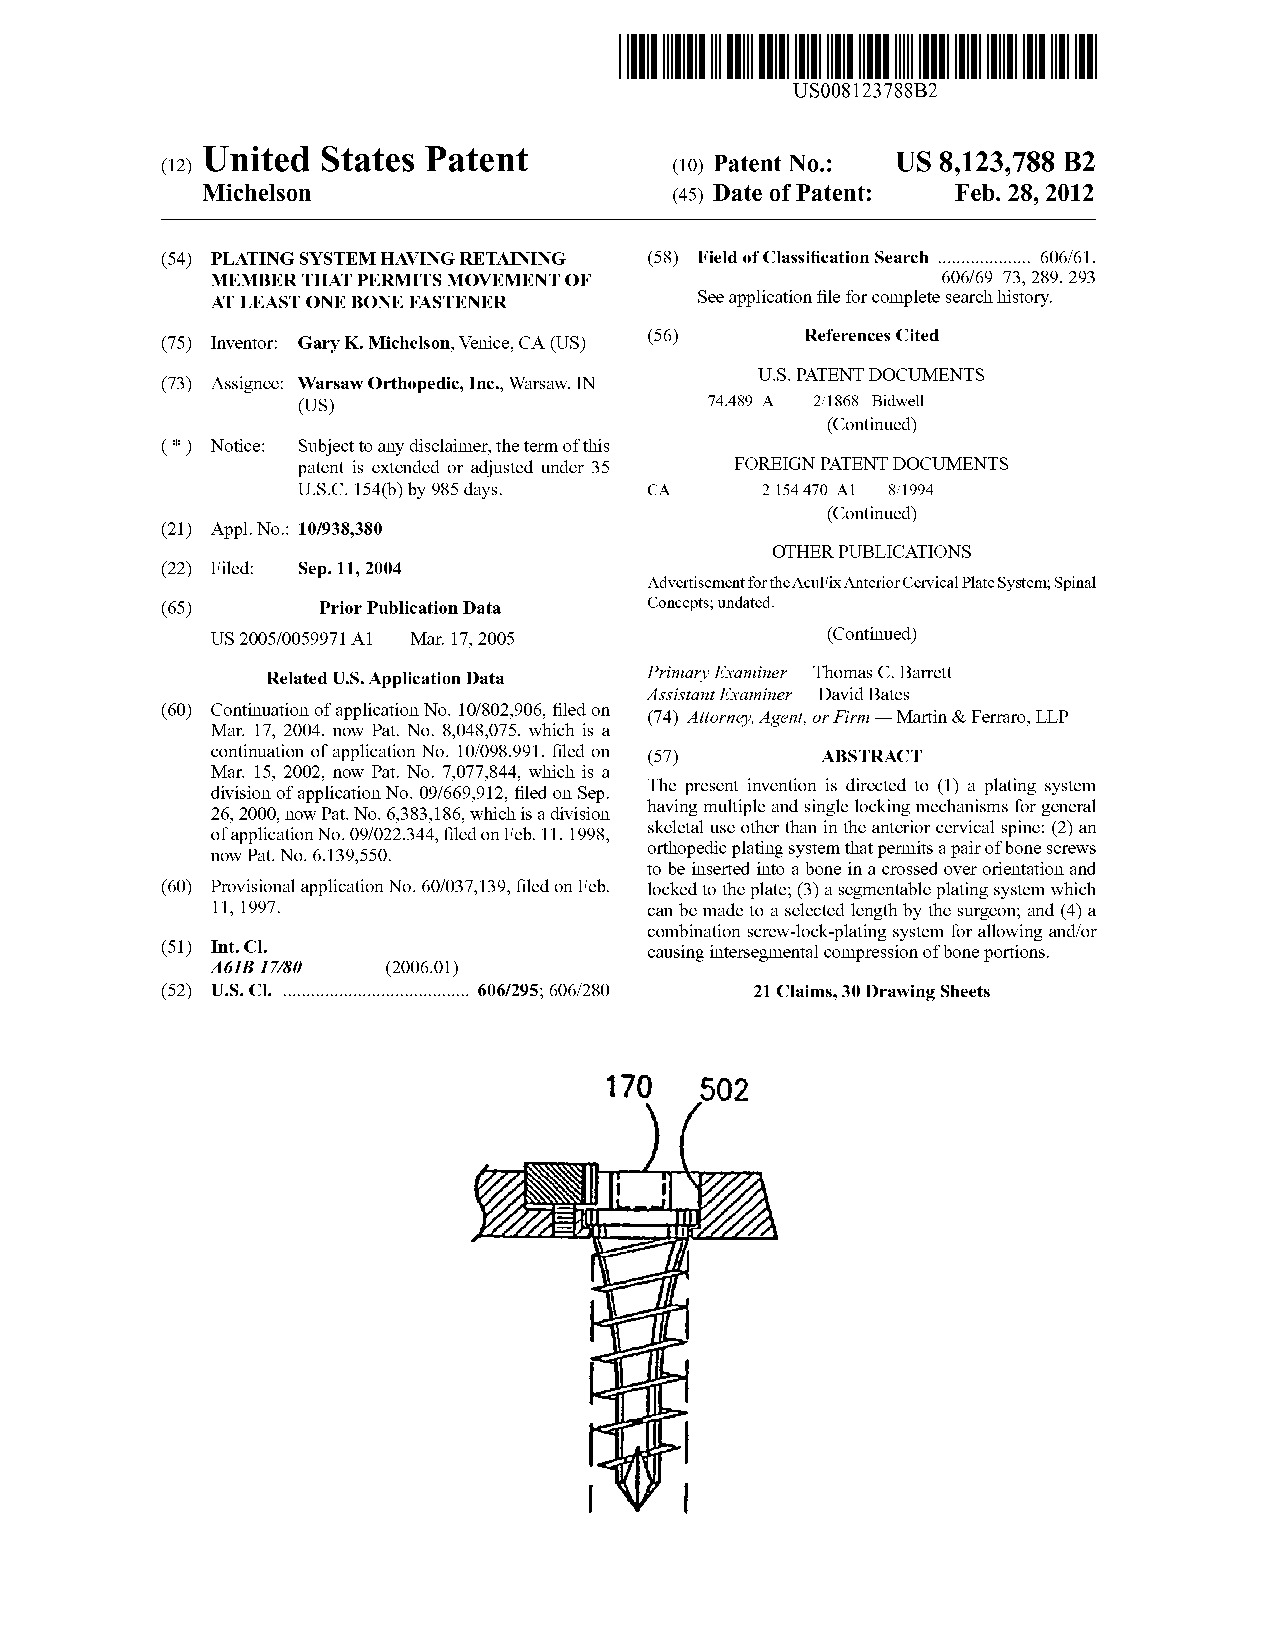 Plating system having retaining member that permits movement of at least     one bone fastener - Patent 8,123,788